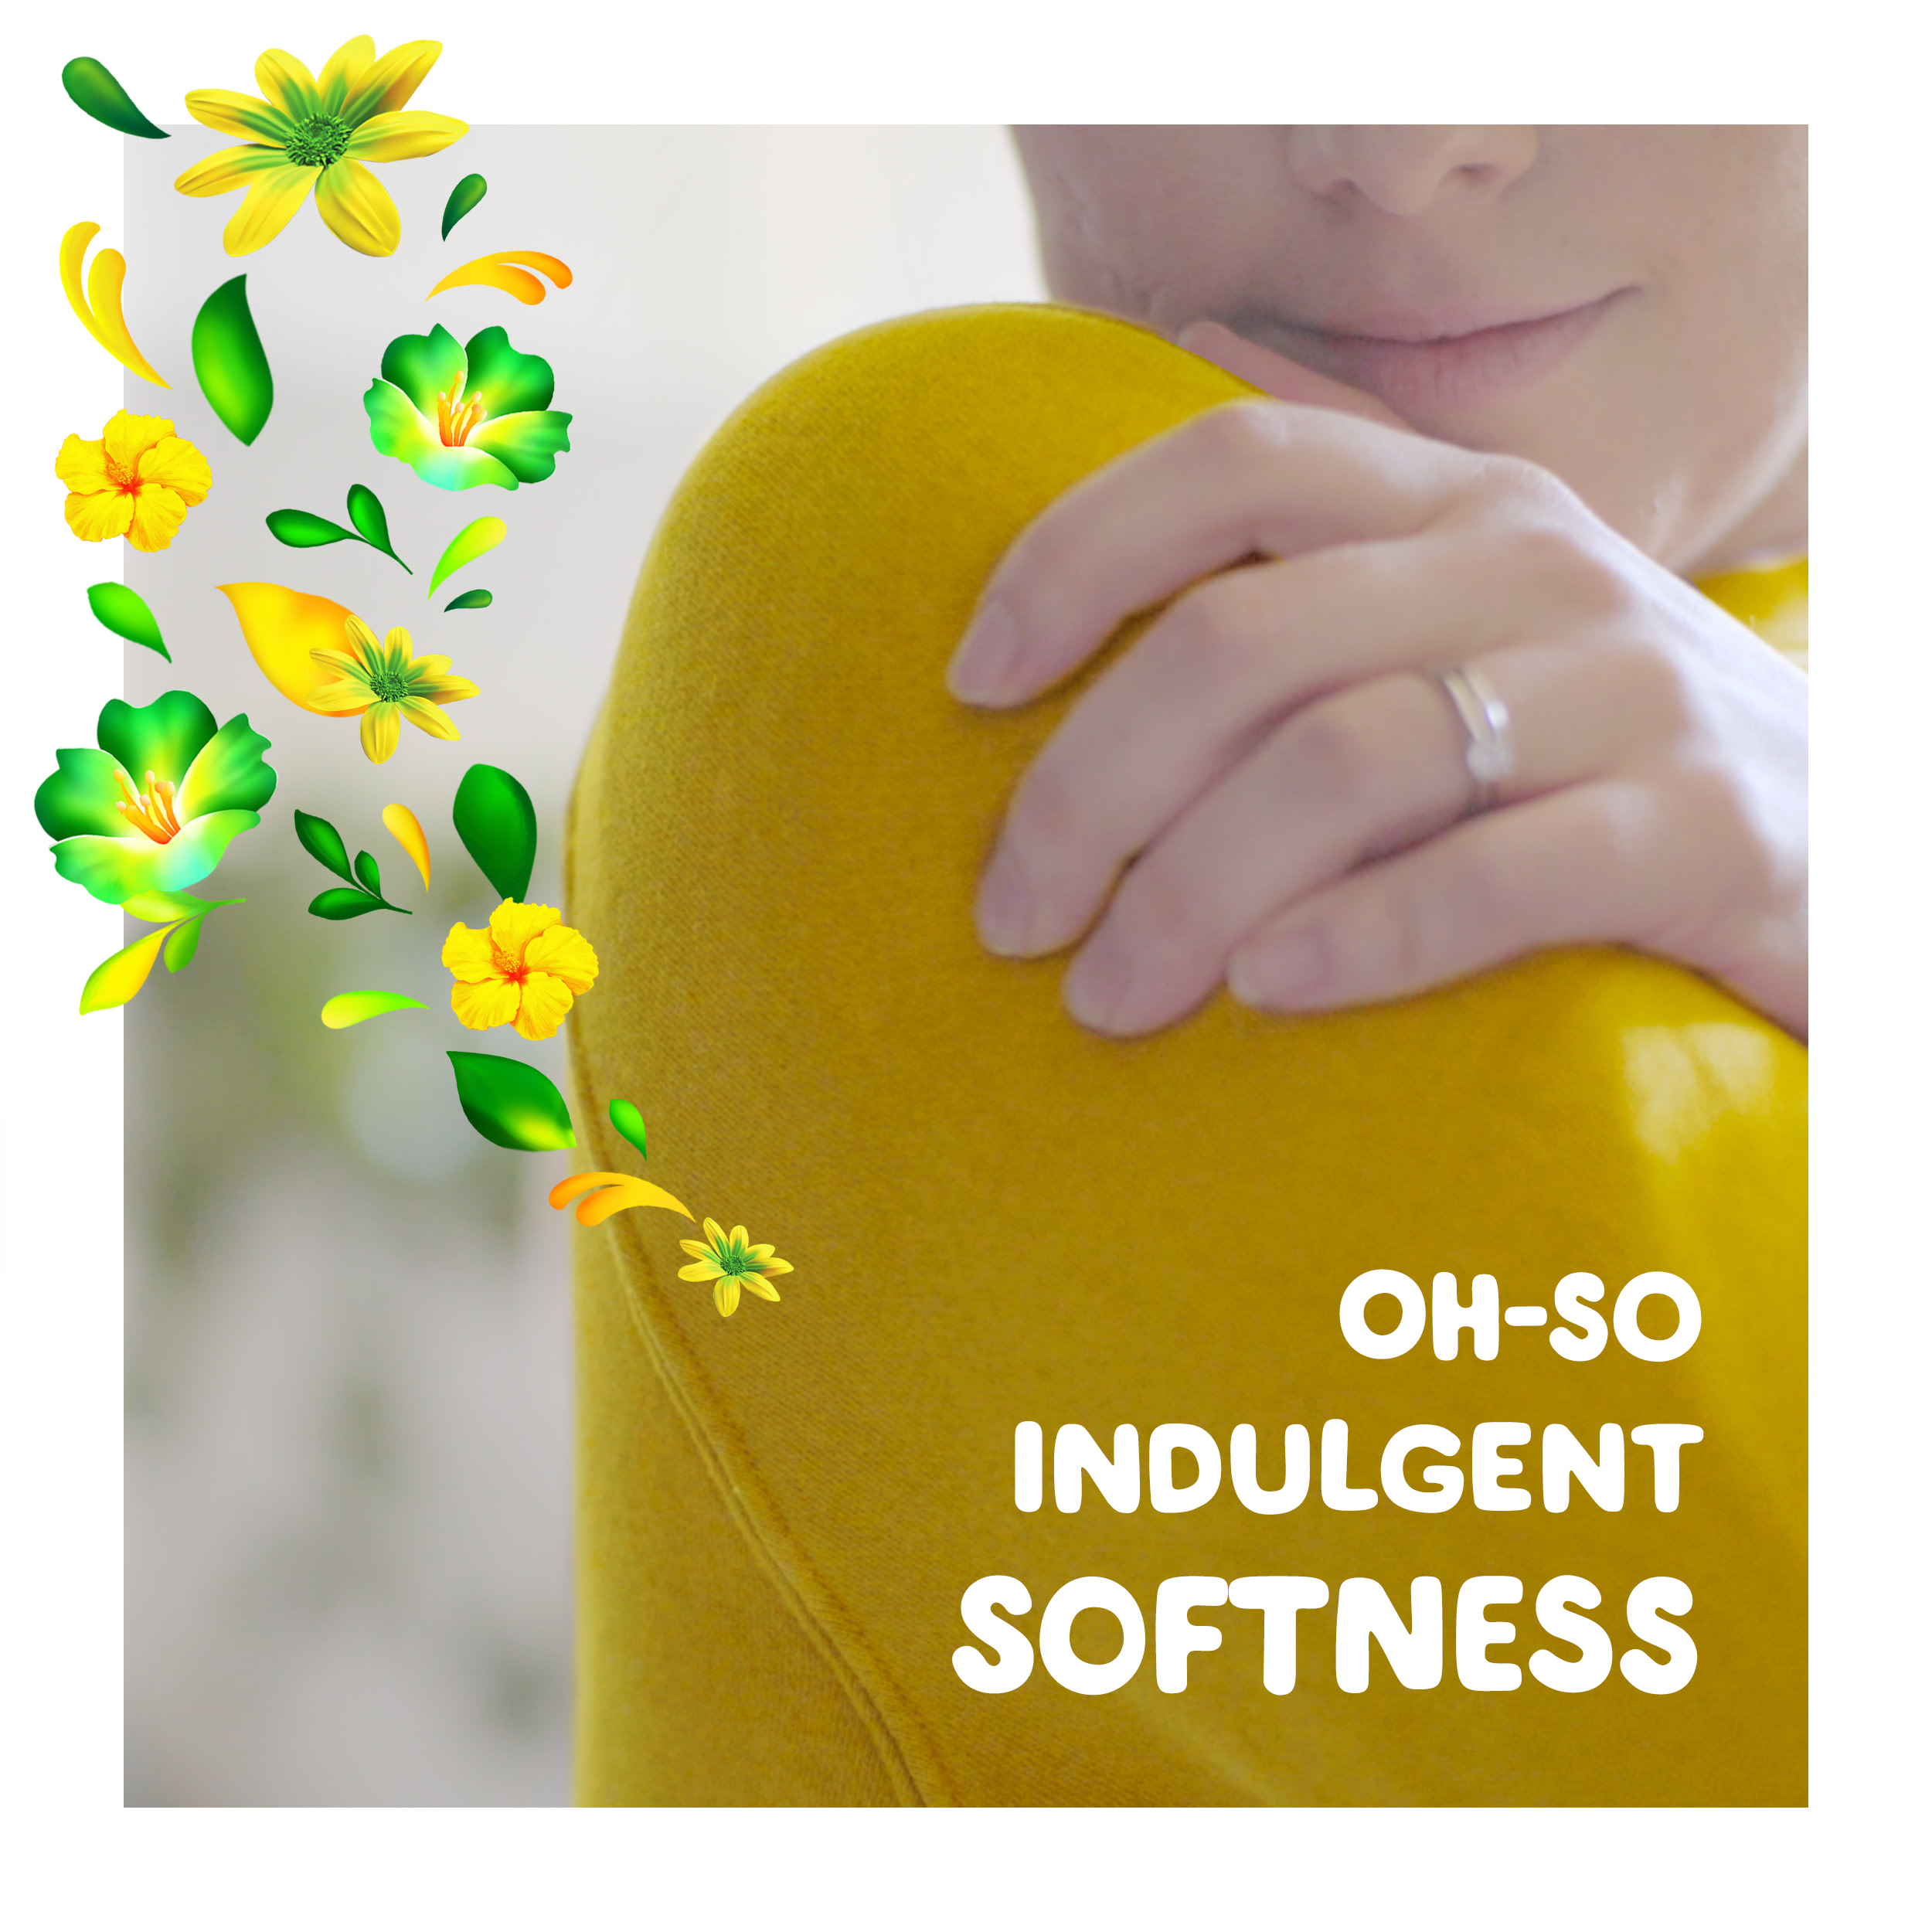 Gain Original Fabric Softener is the number one scent in soft based on sales